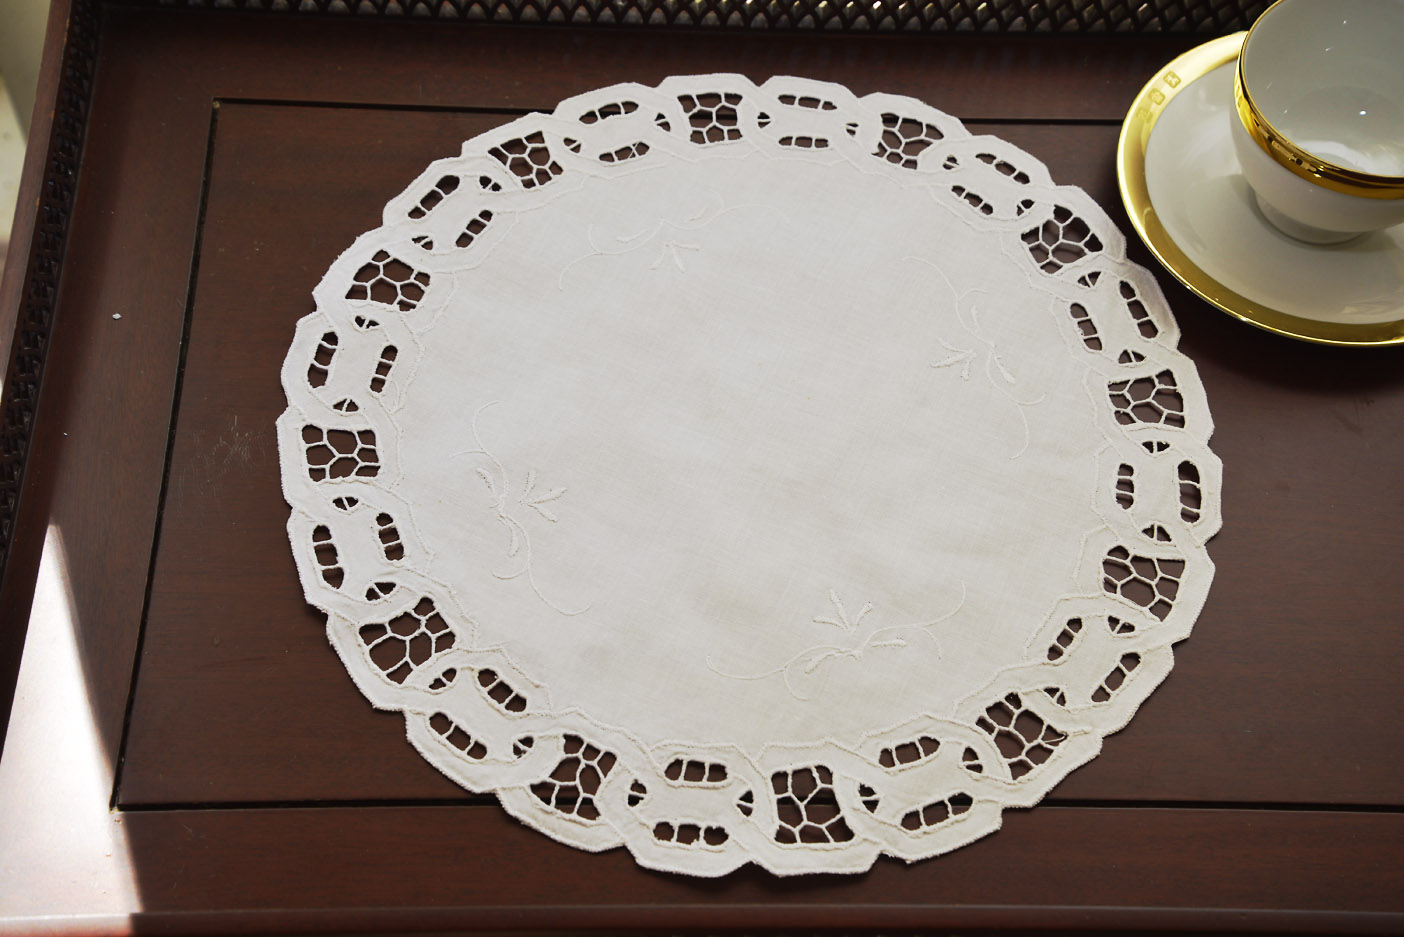 14" Round, white color, dynasty cutworks doily